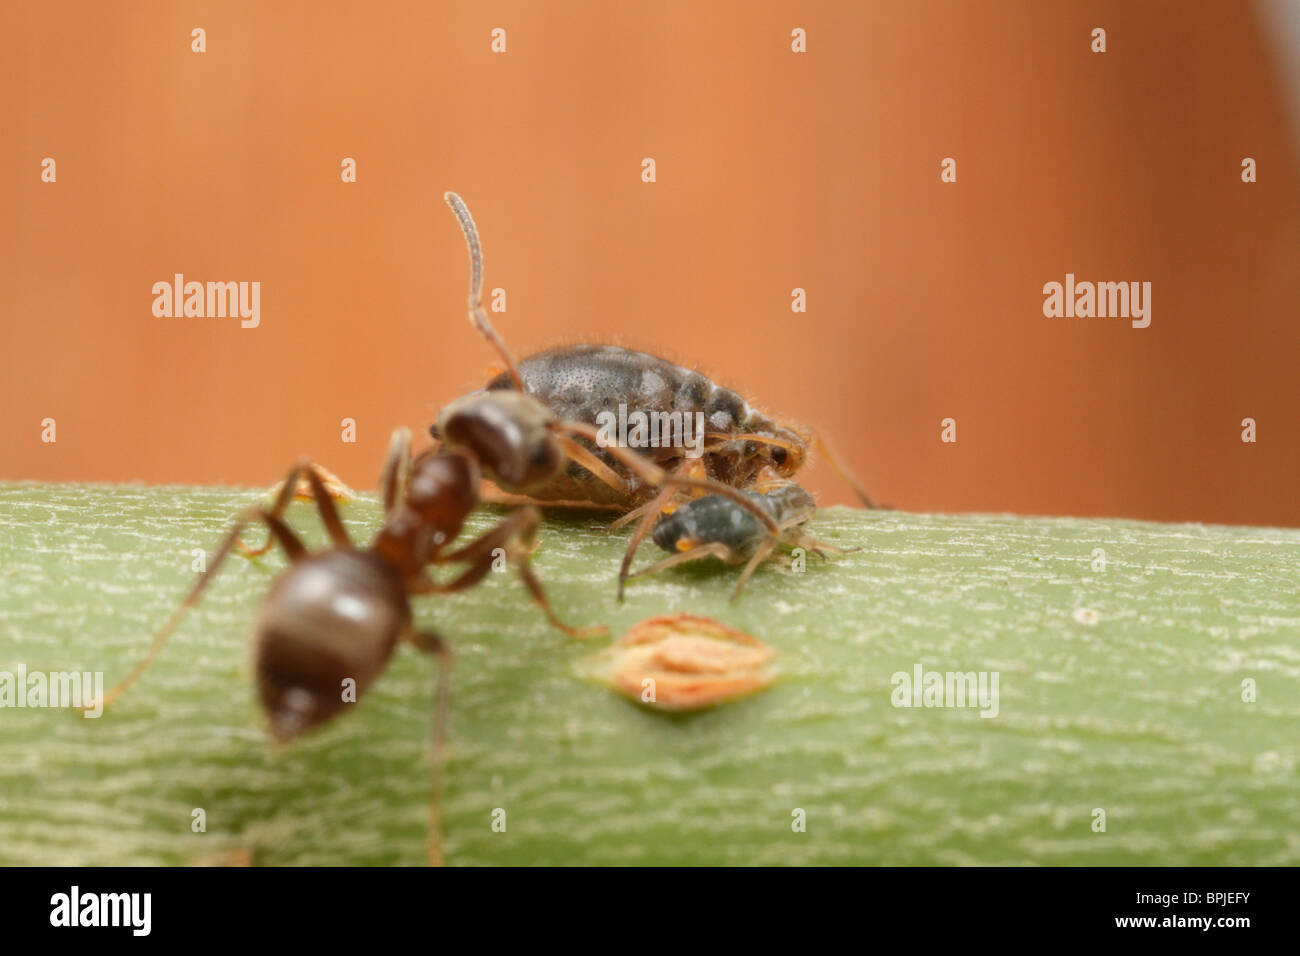 Pterocomma salicis (Black Willow Aphid), tended to by Black Garden Ants (Lasius niger) Stock Photo